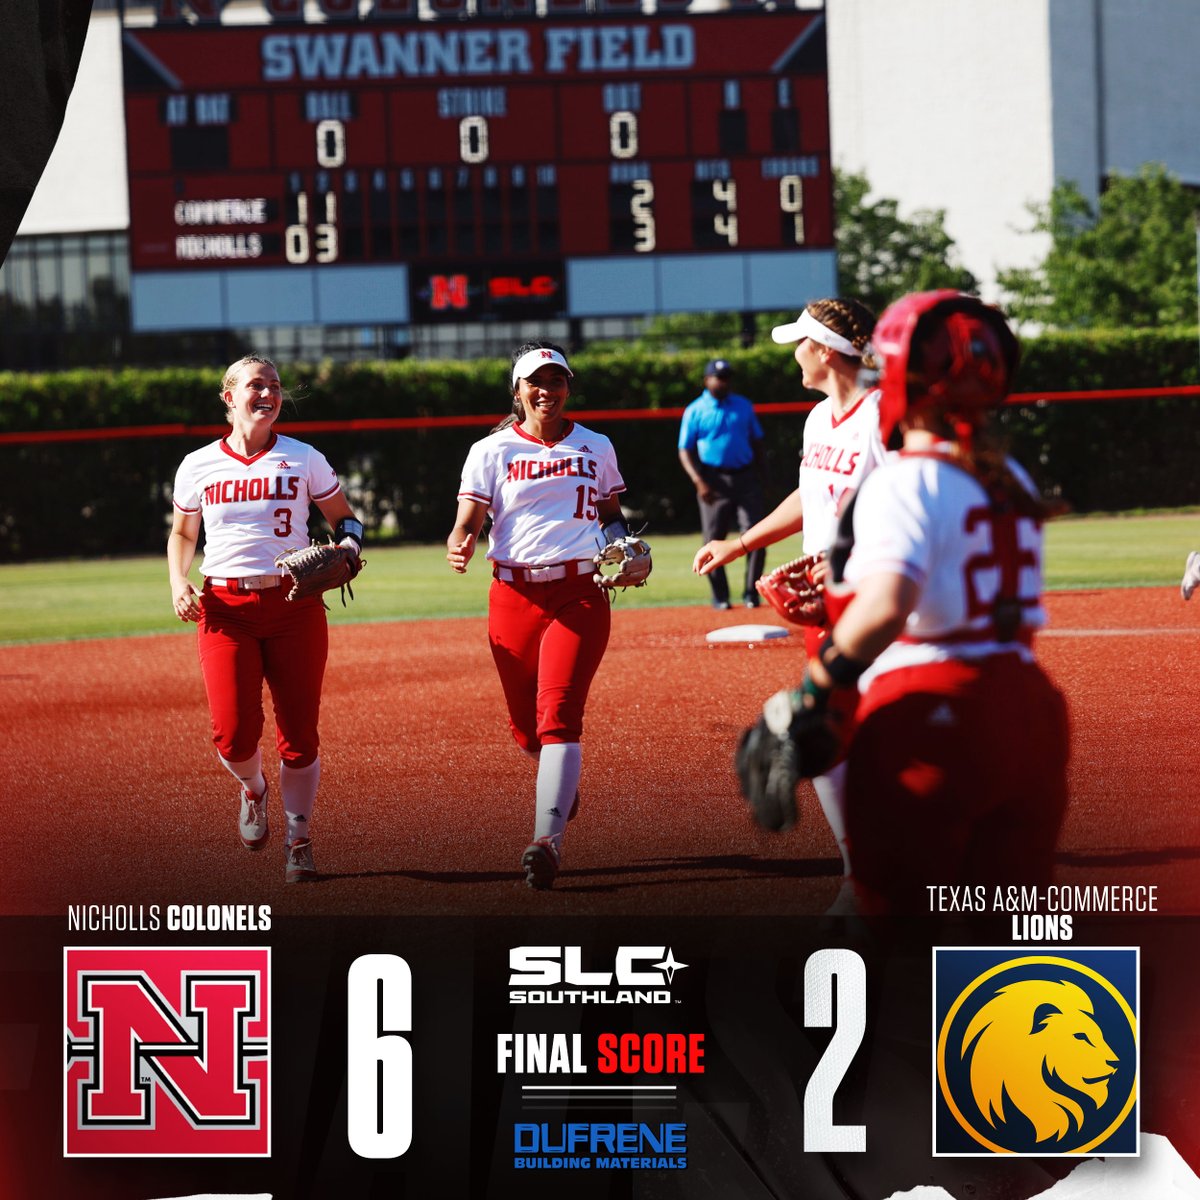 Game 1 goes to the Colonels!! #geauxcolonels